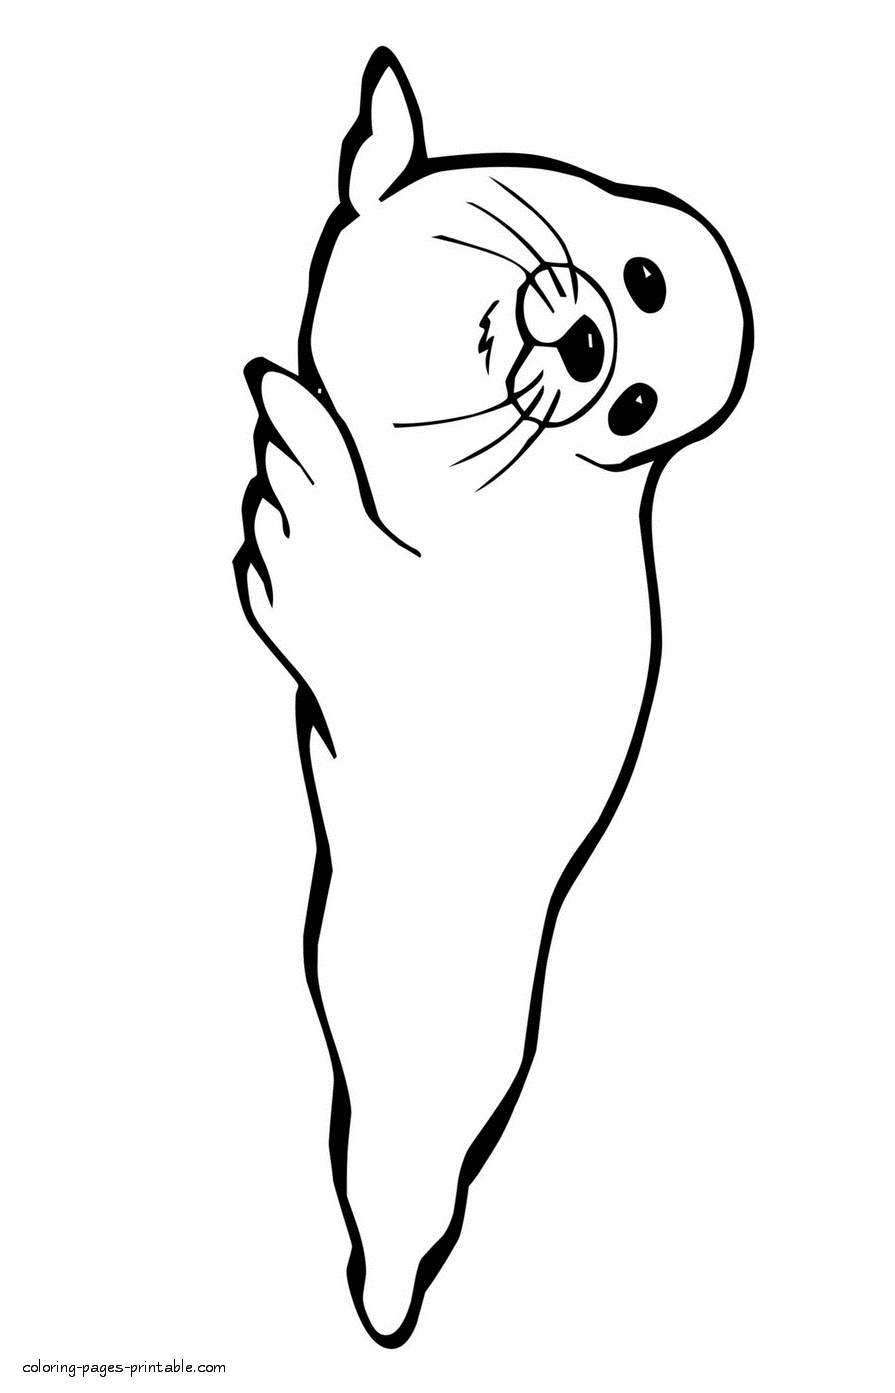 Harbor seal coloring page for kids